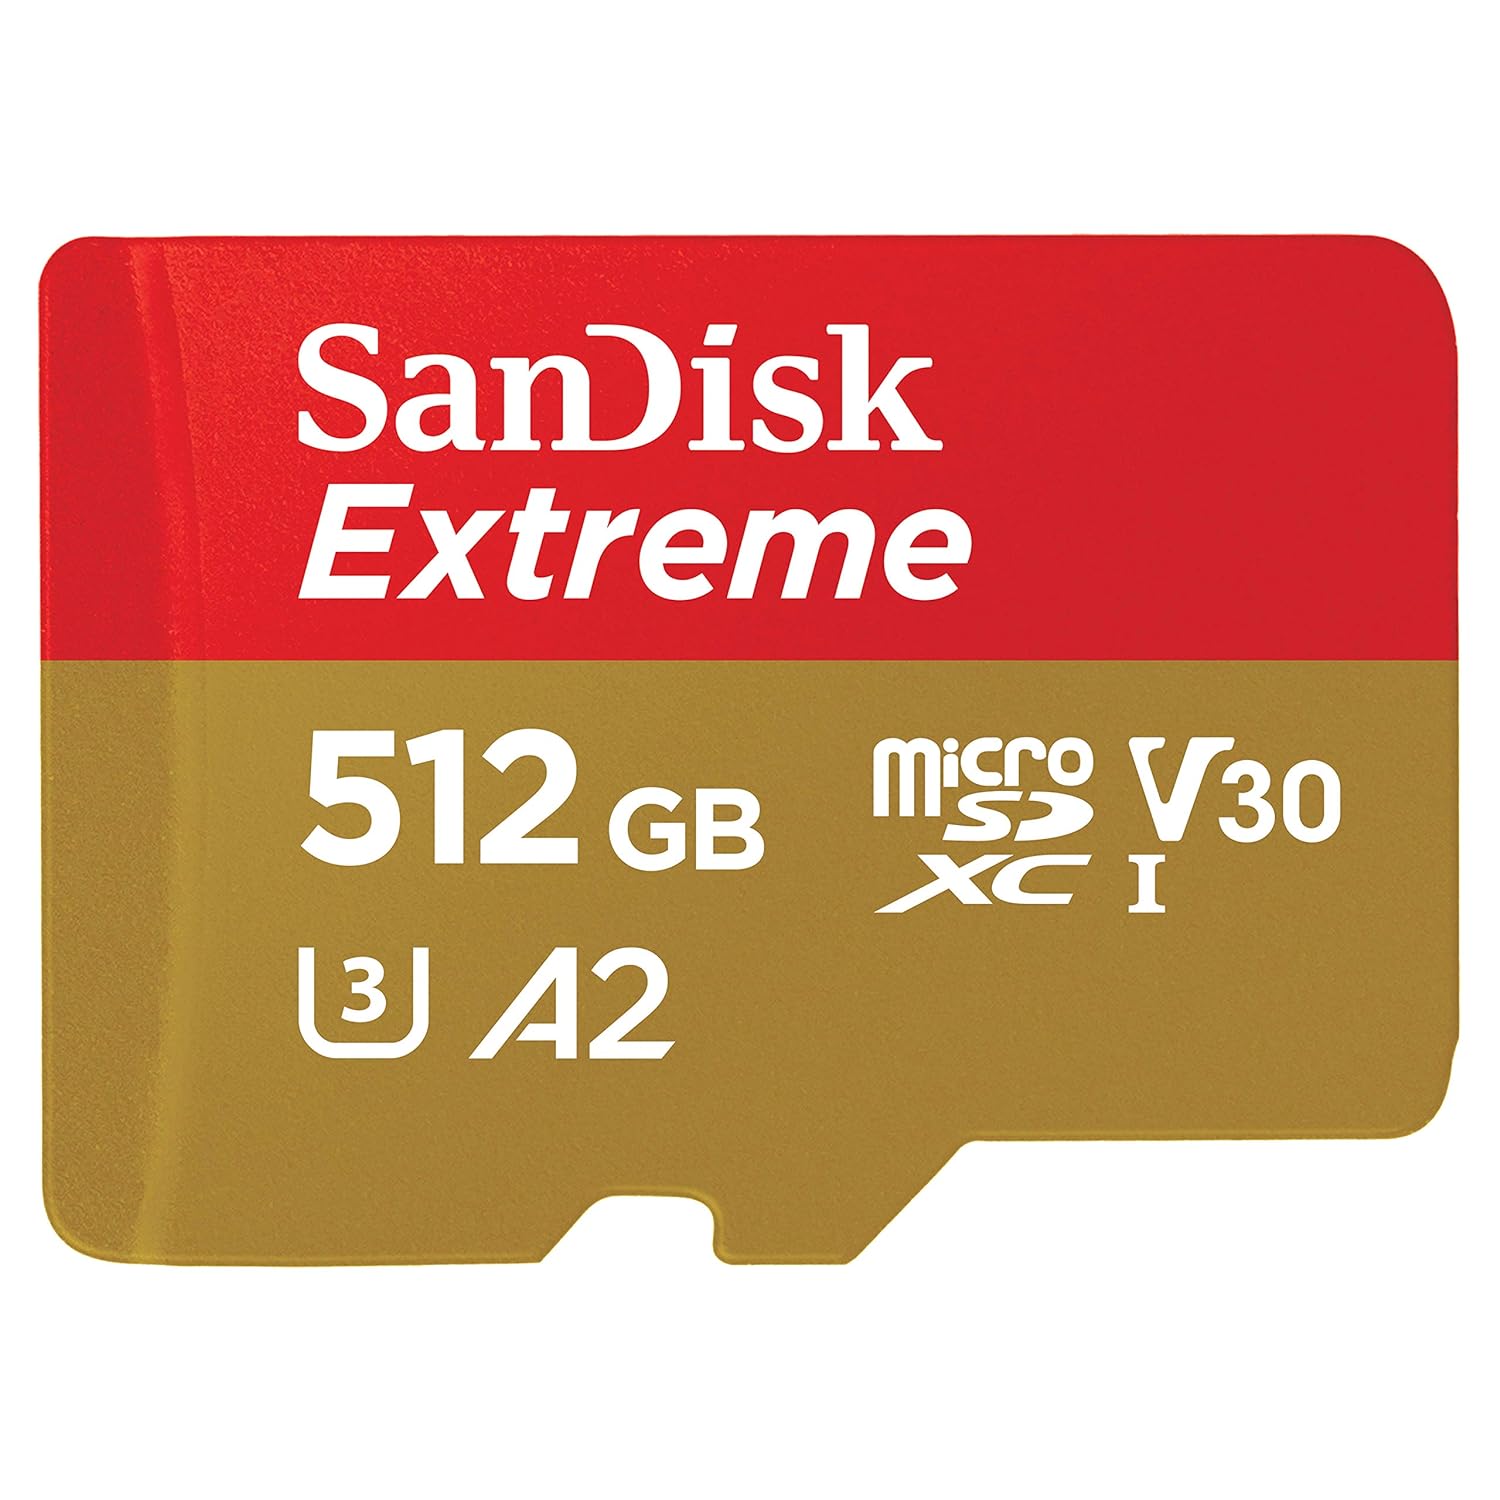 Sandisk A2 Extreme Micro SDHC Class 10 (190 MBPS) 512 GB